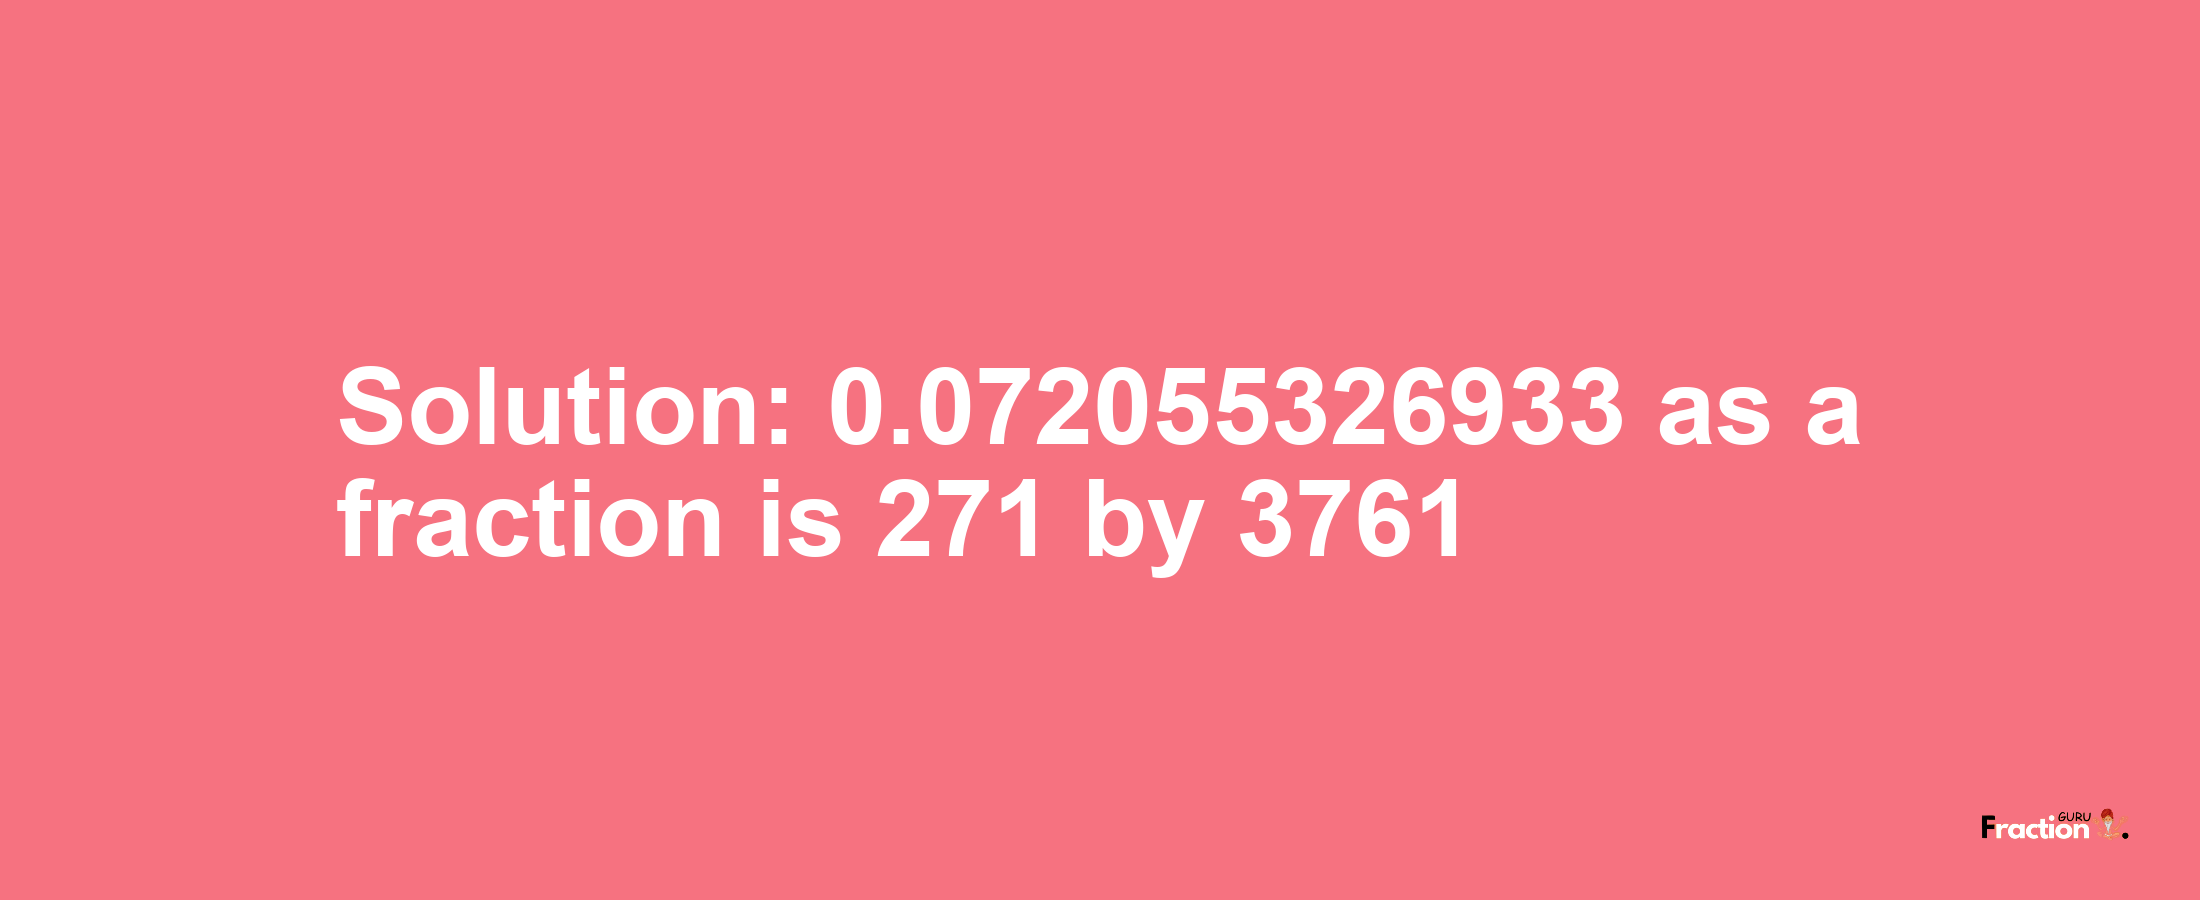 Solution:0.072055326933 as a fraction is 271/3761